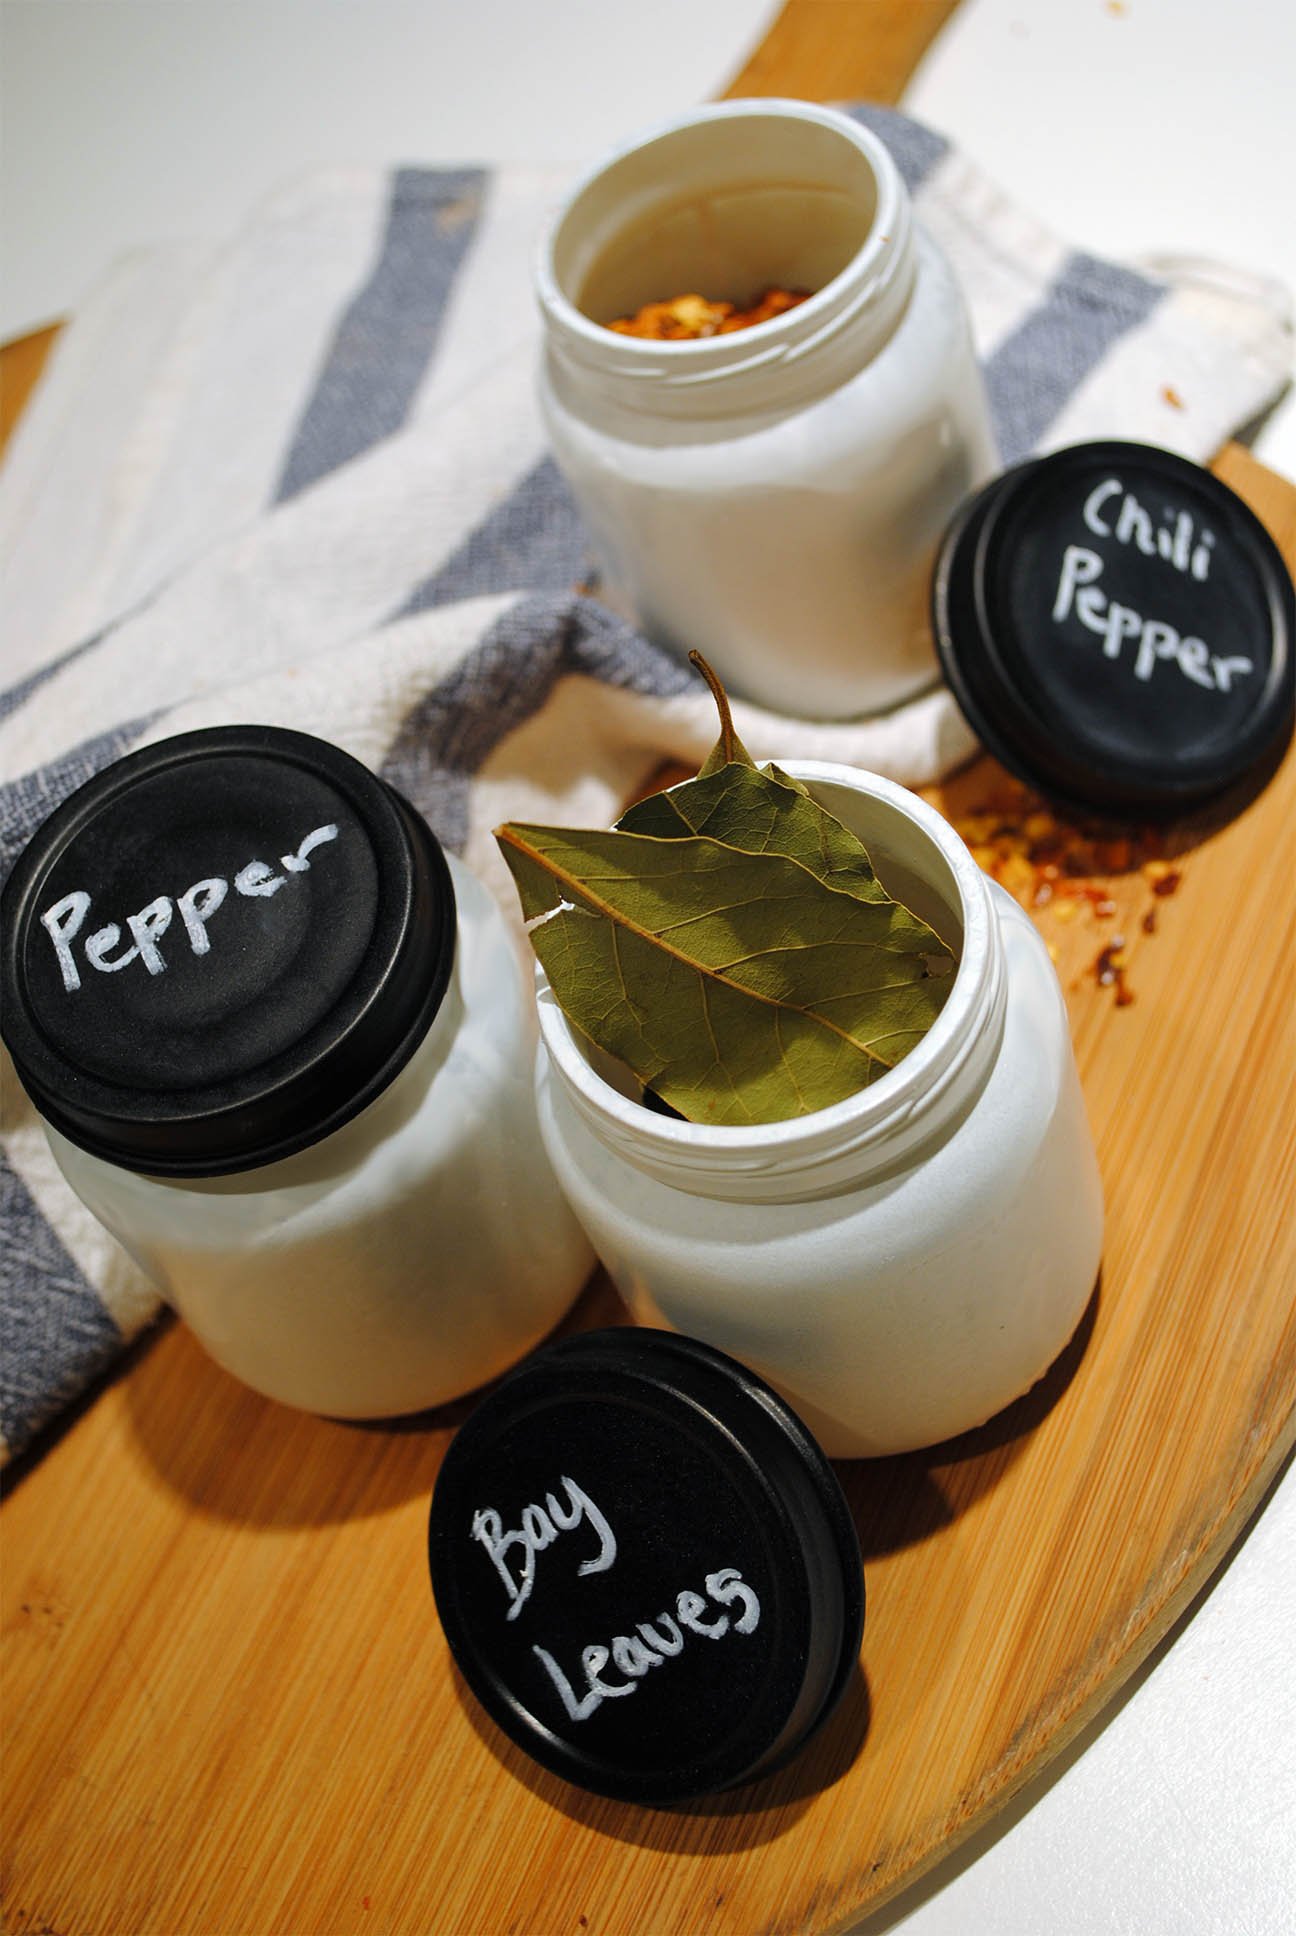 How to make cool, modern spice jars